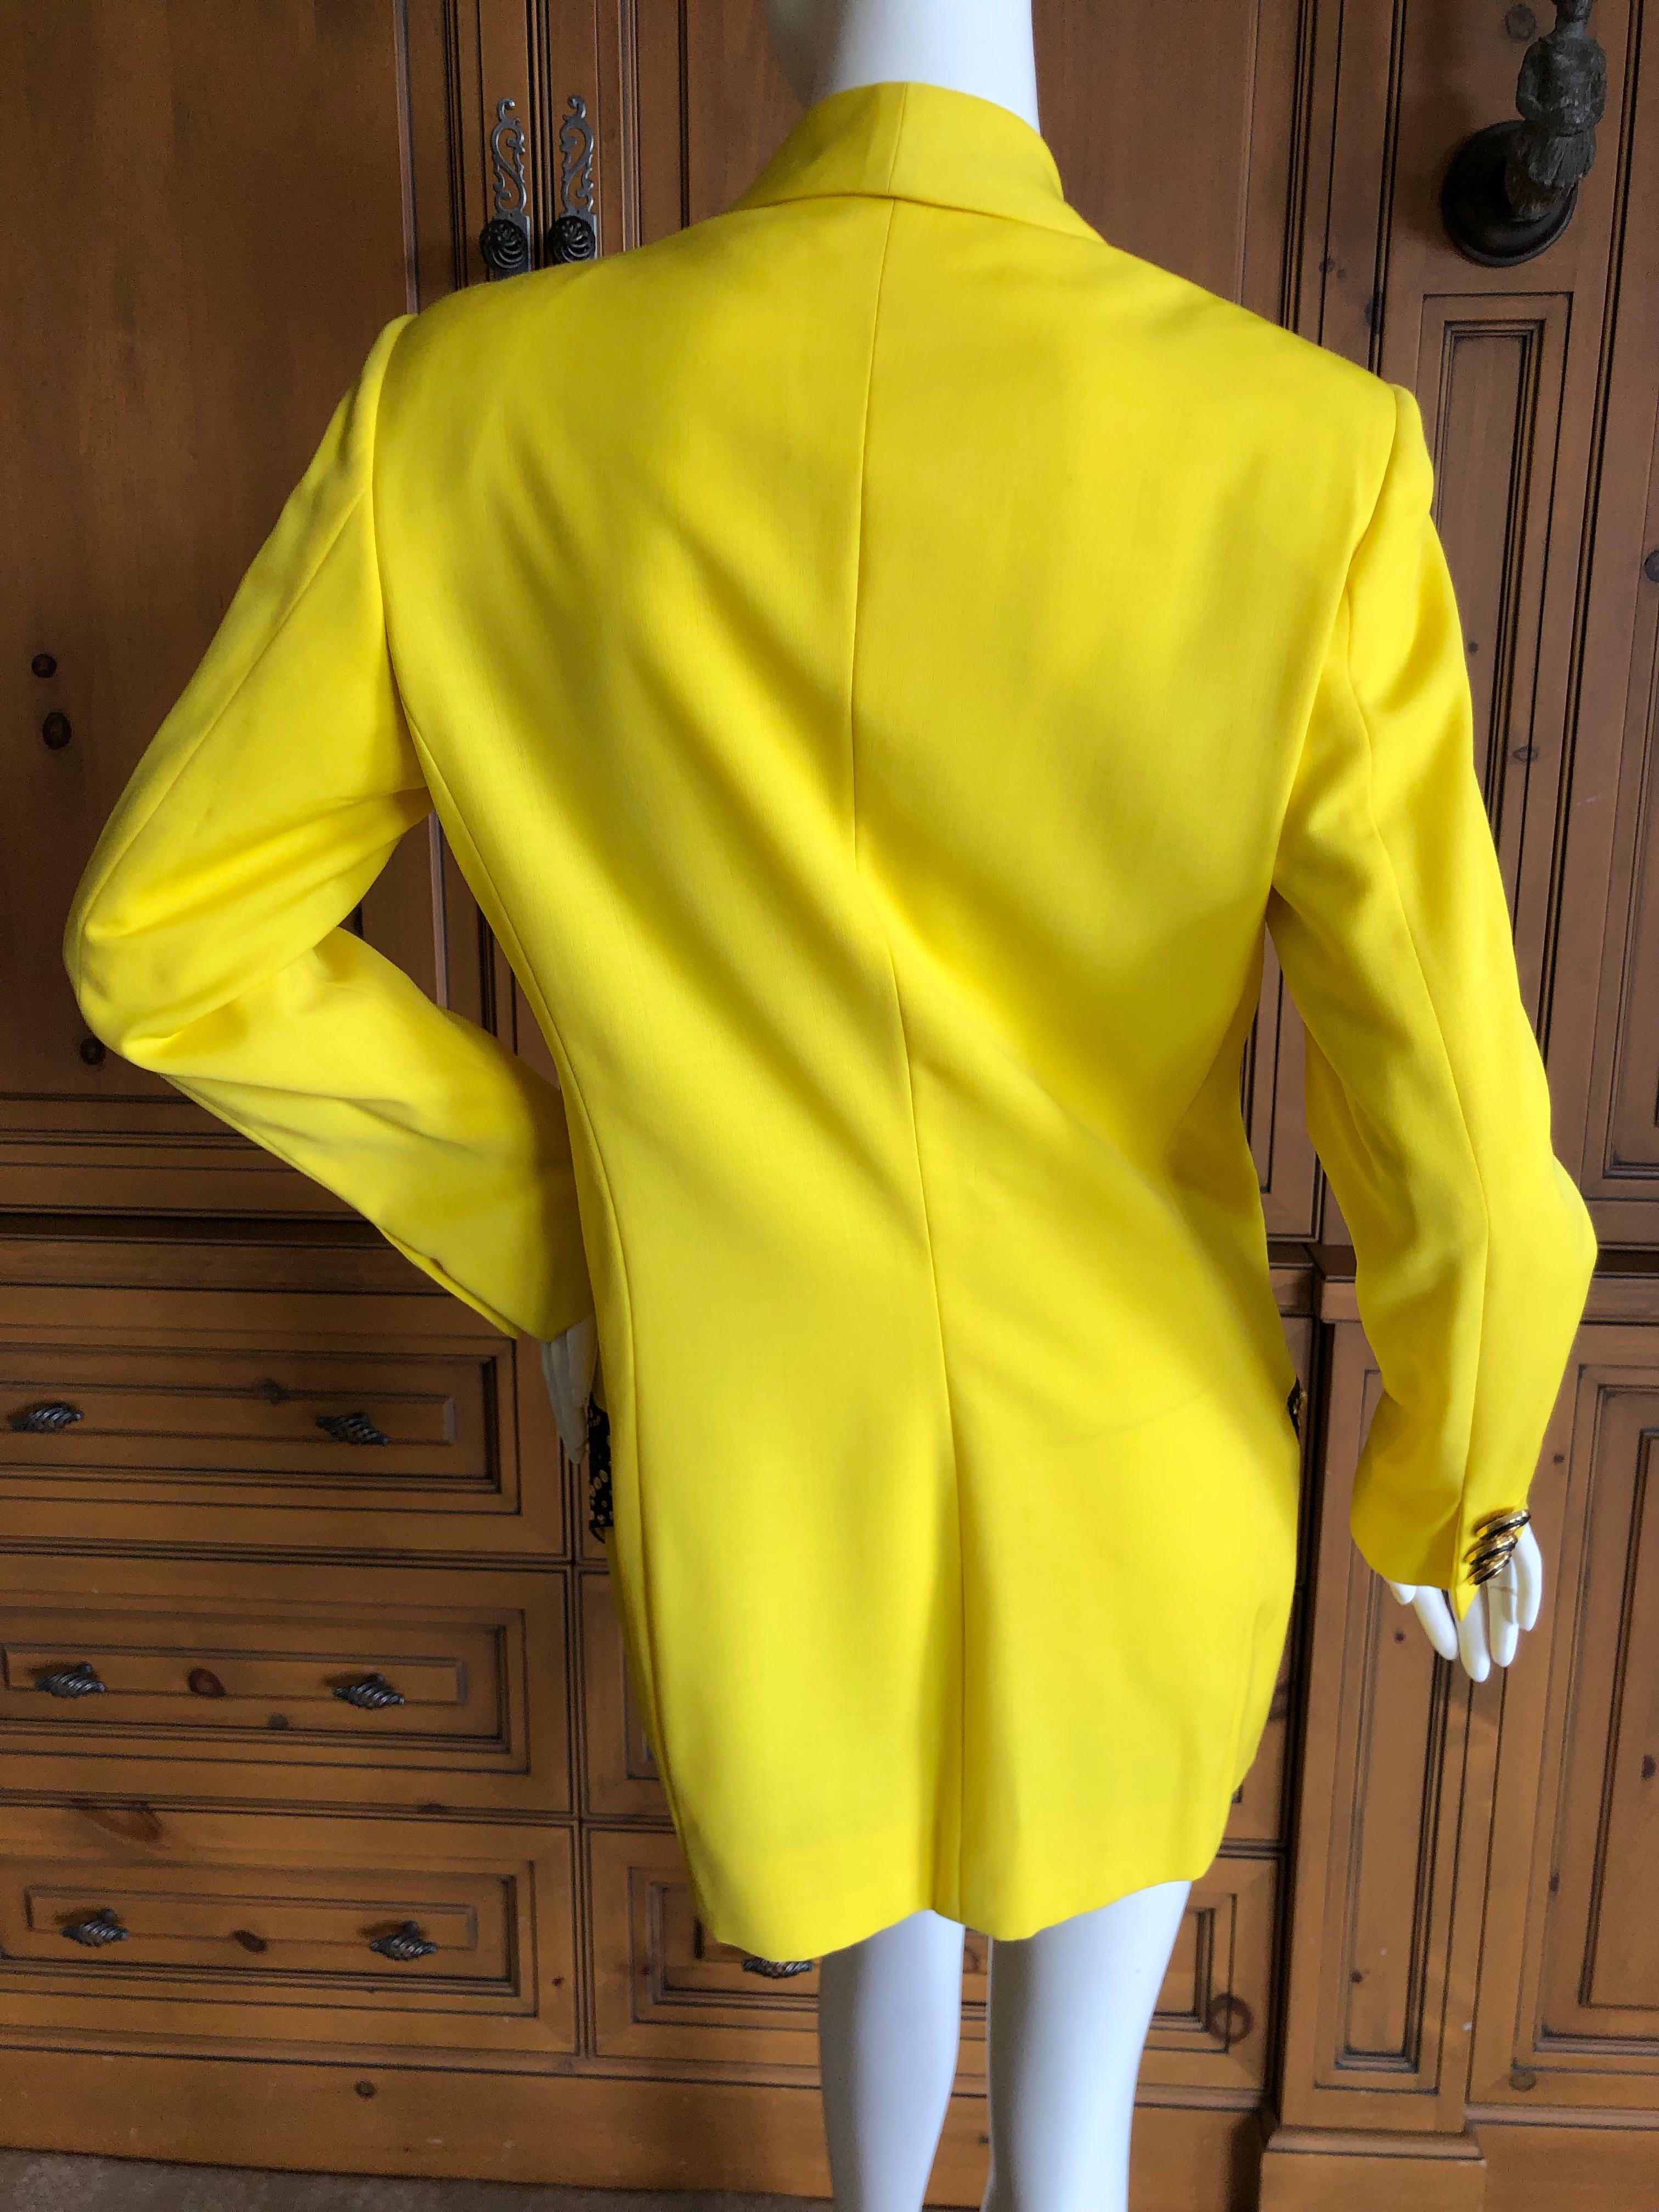 Gianni Versace Iconic Fall 1992 Screaming Yellow Jacket with Leather Details For Sale 3